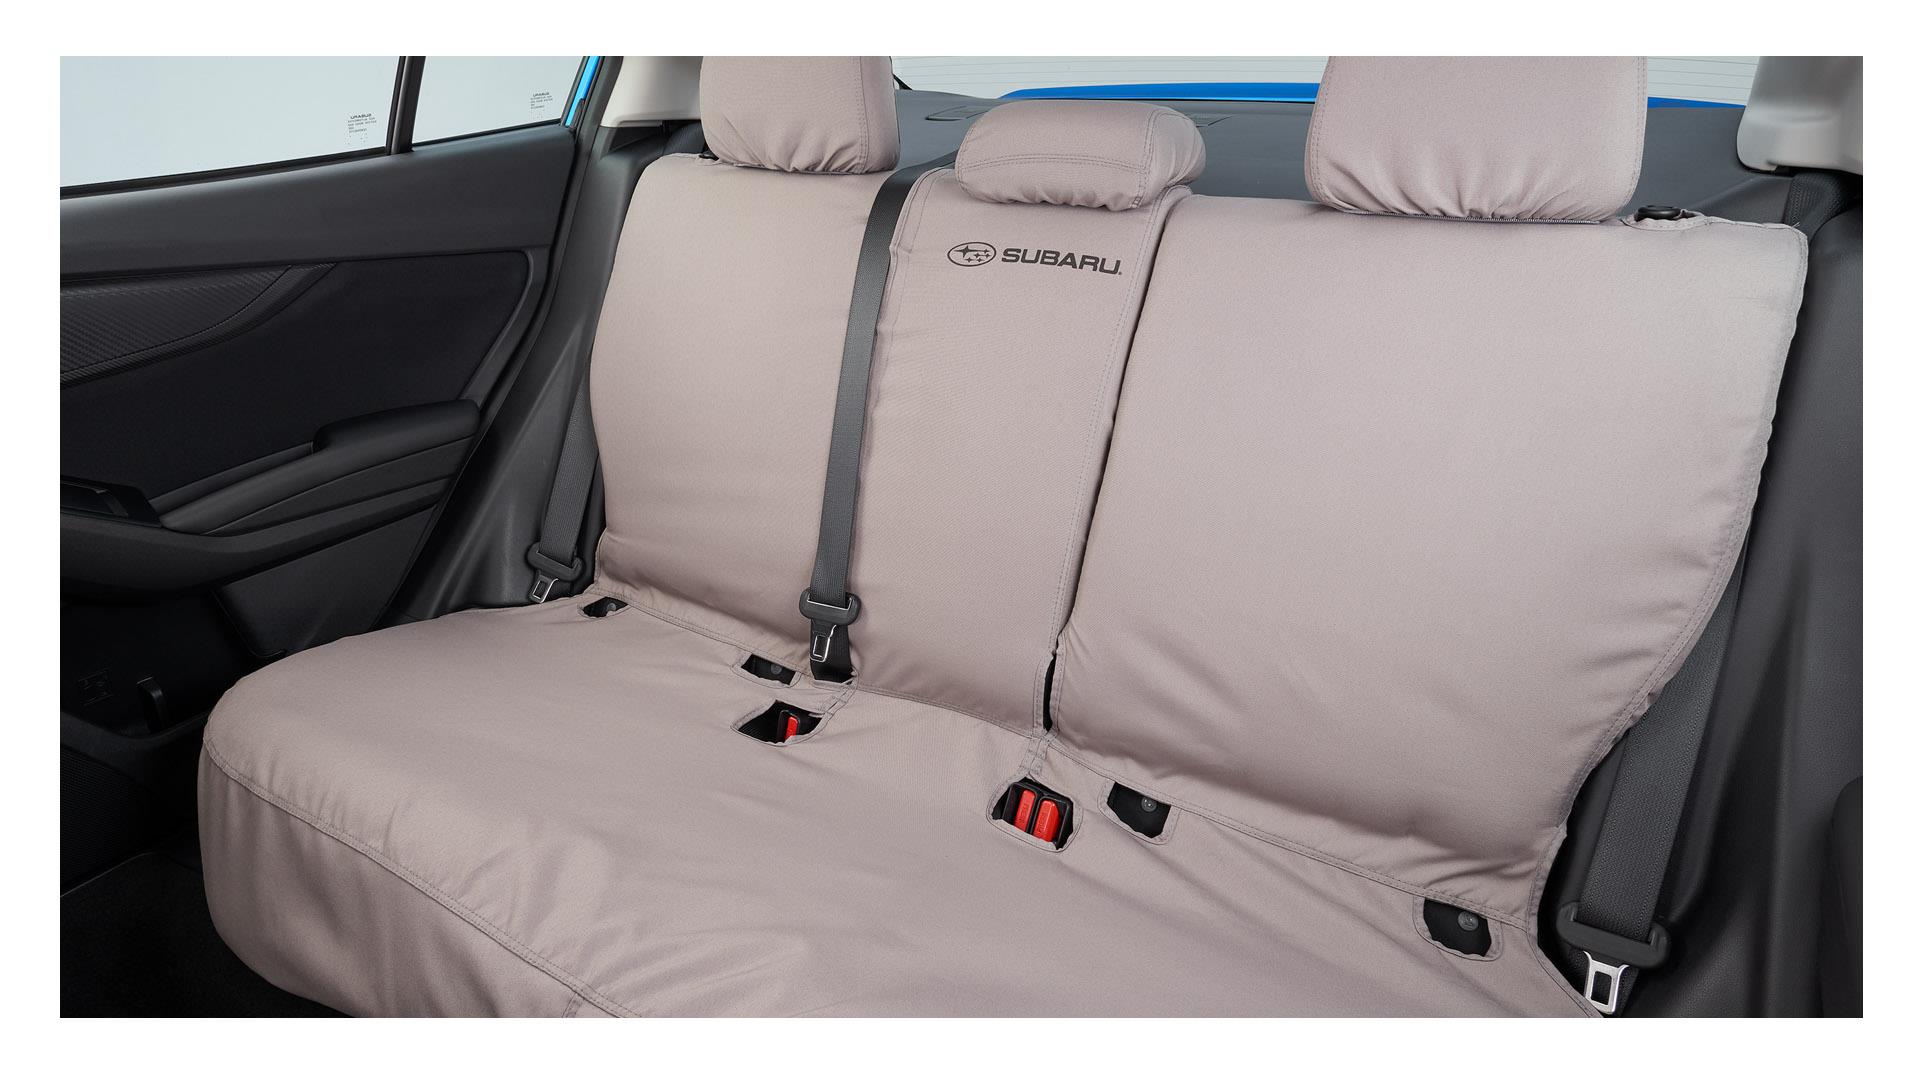 F411SFL000 Subaru Rear seat cover for models with center arm